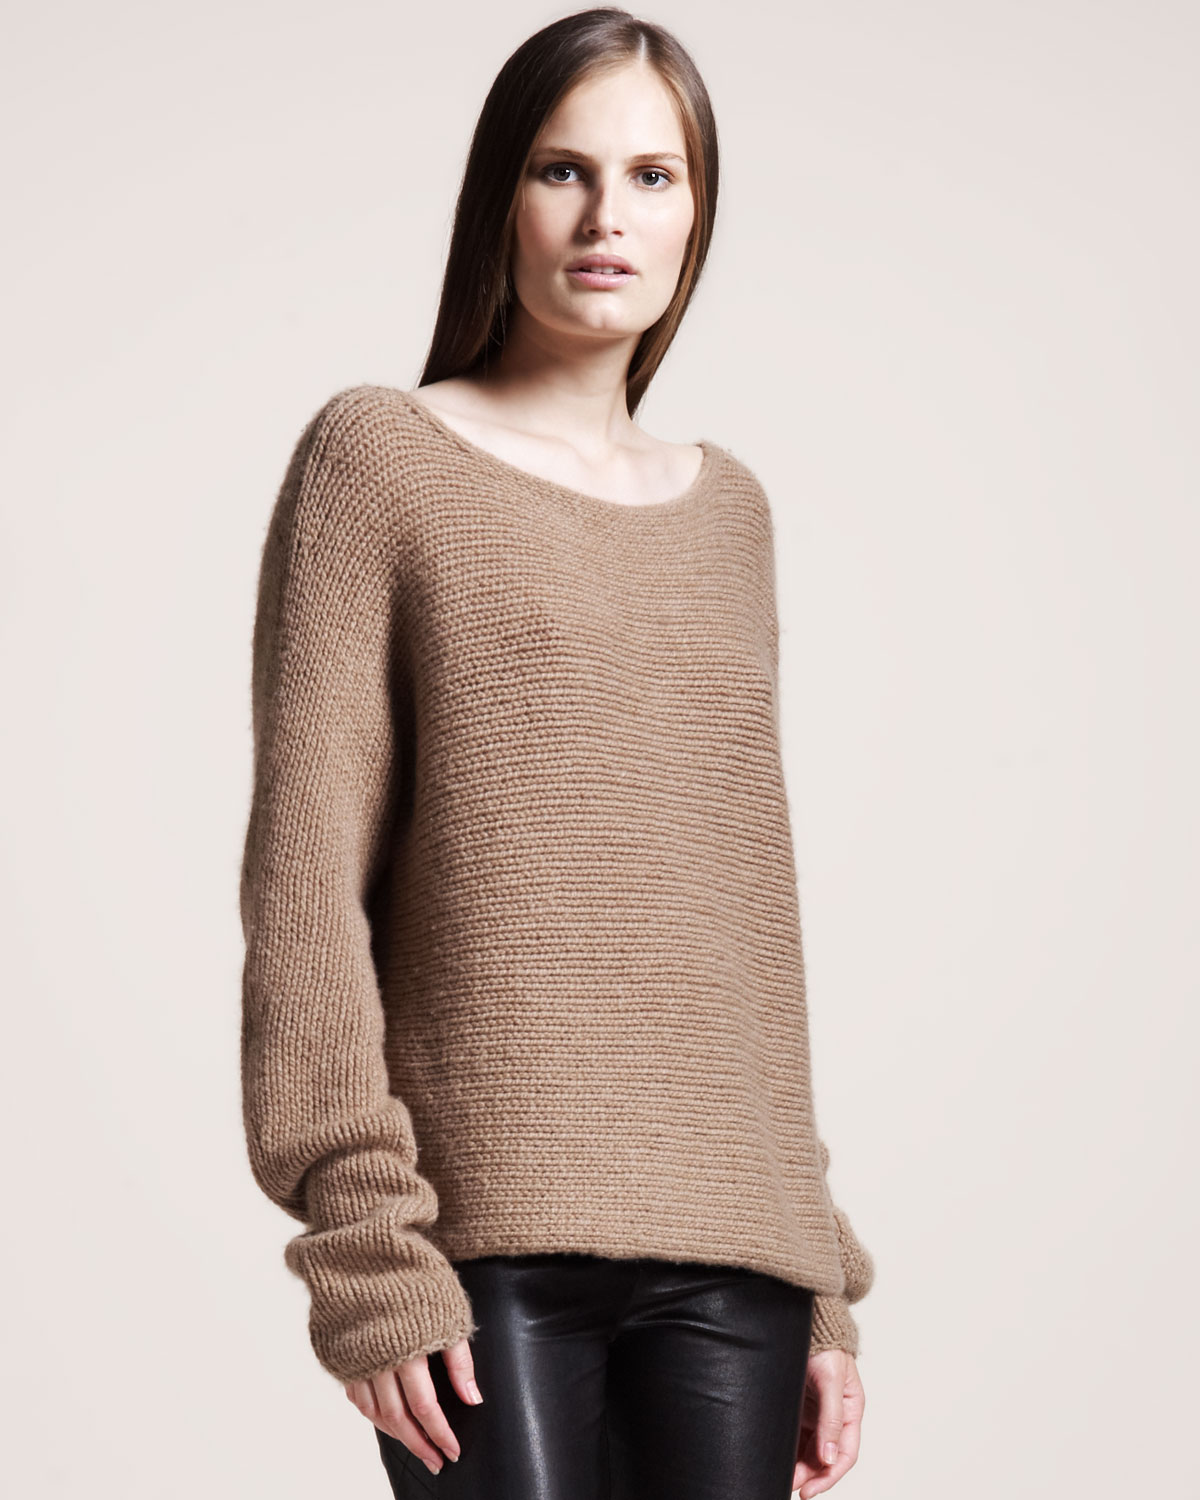 Lyst - The Row Bateauneck Cashmere Sweater in Natural